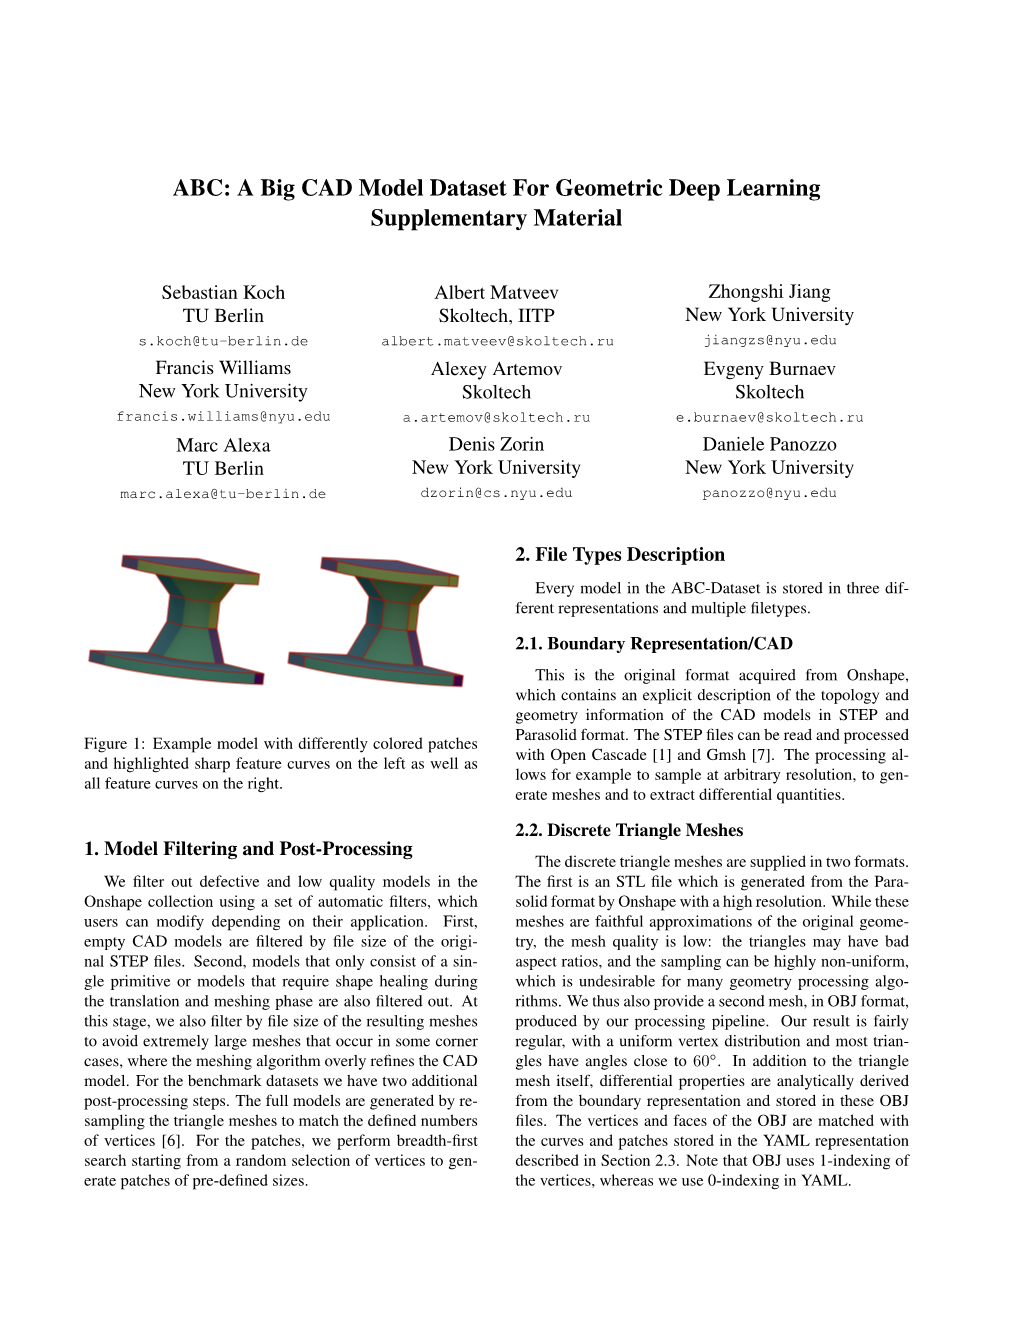 ABC: a Big CAD Model Dataset for Geometric Deep Learning Supplementary Material